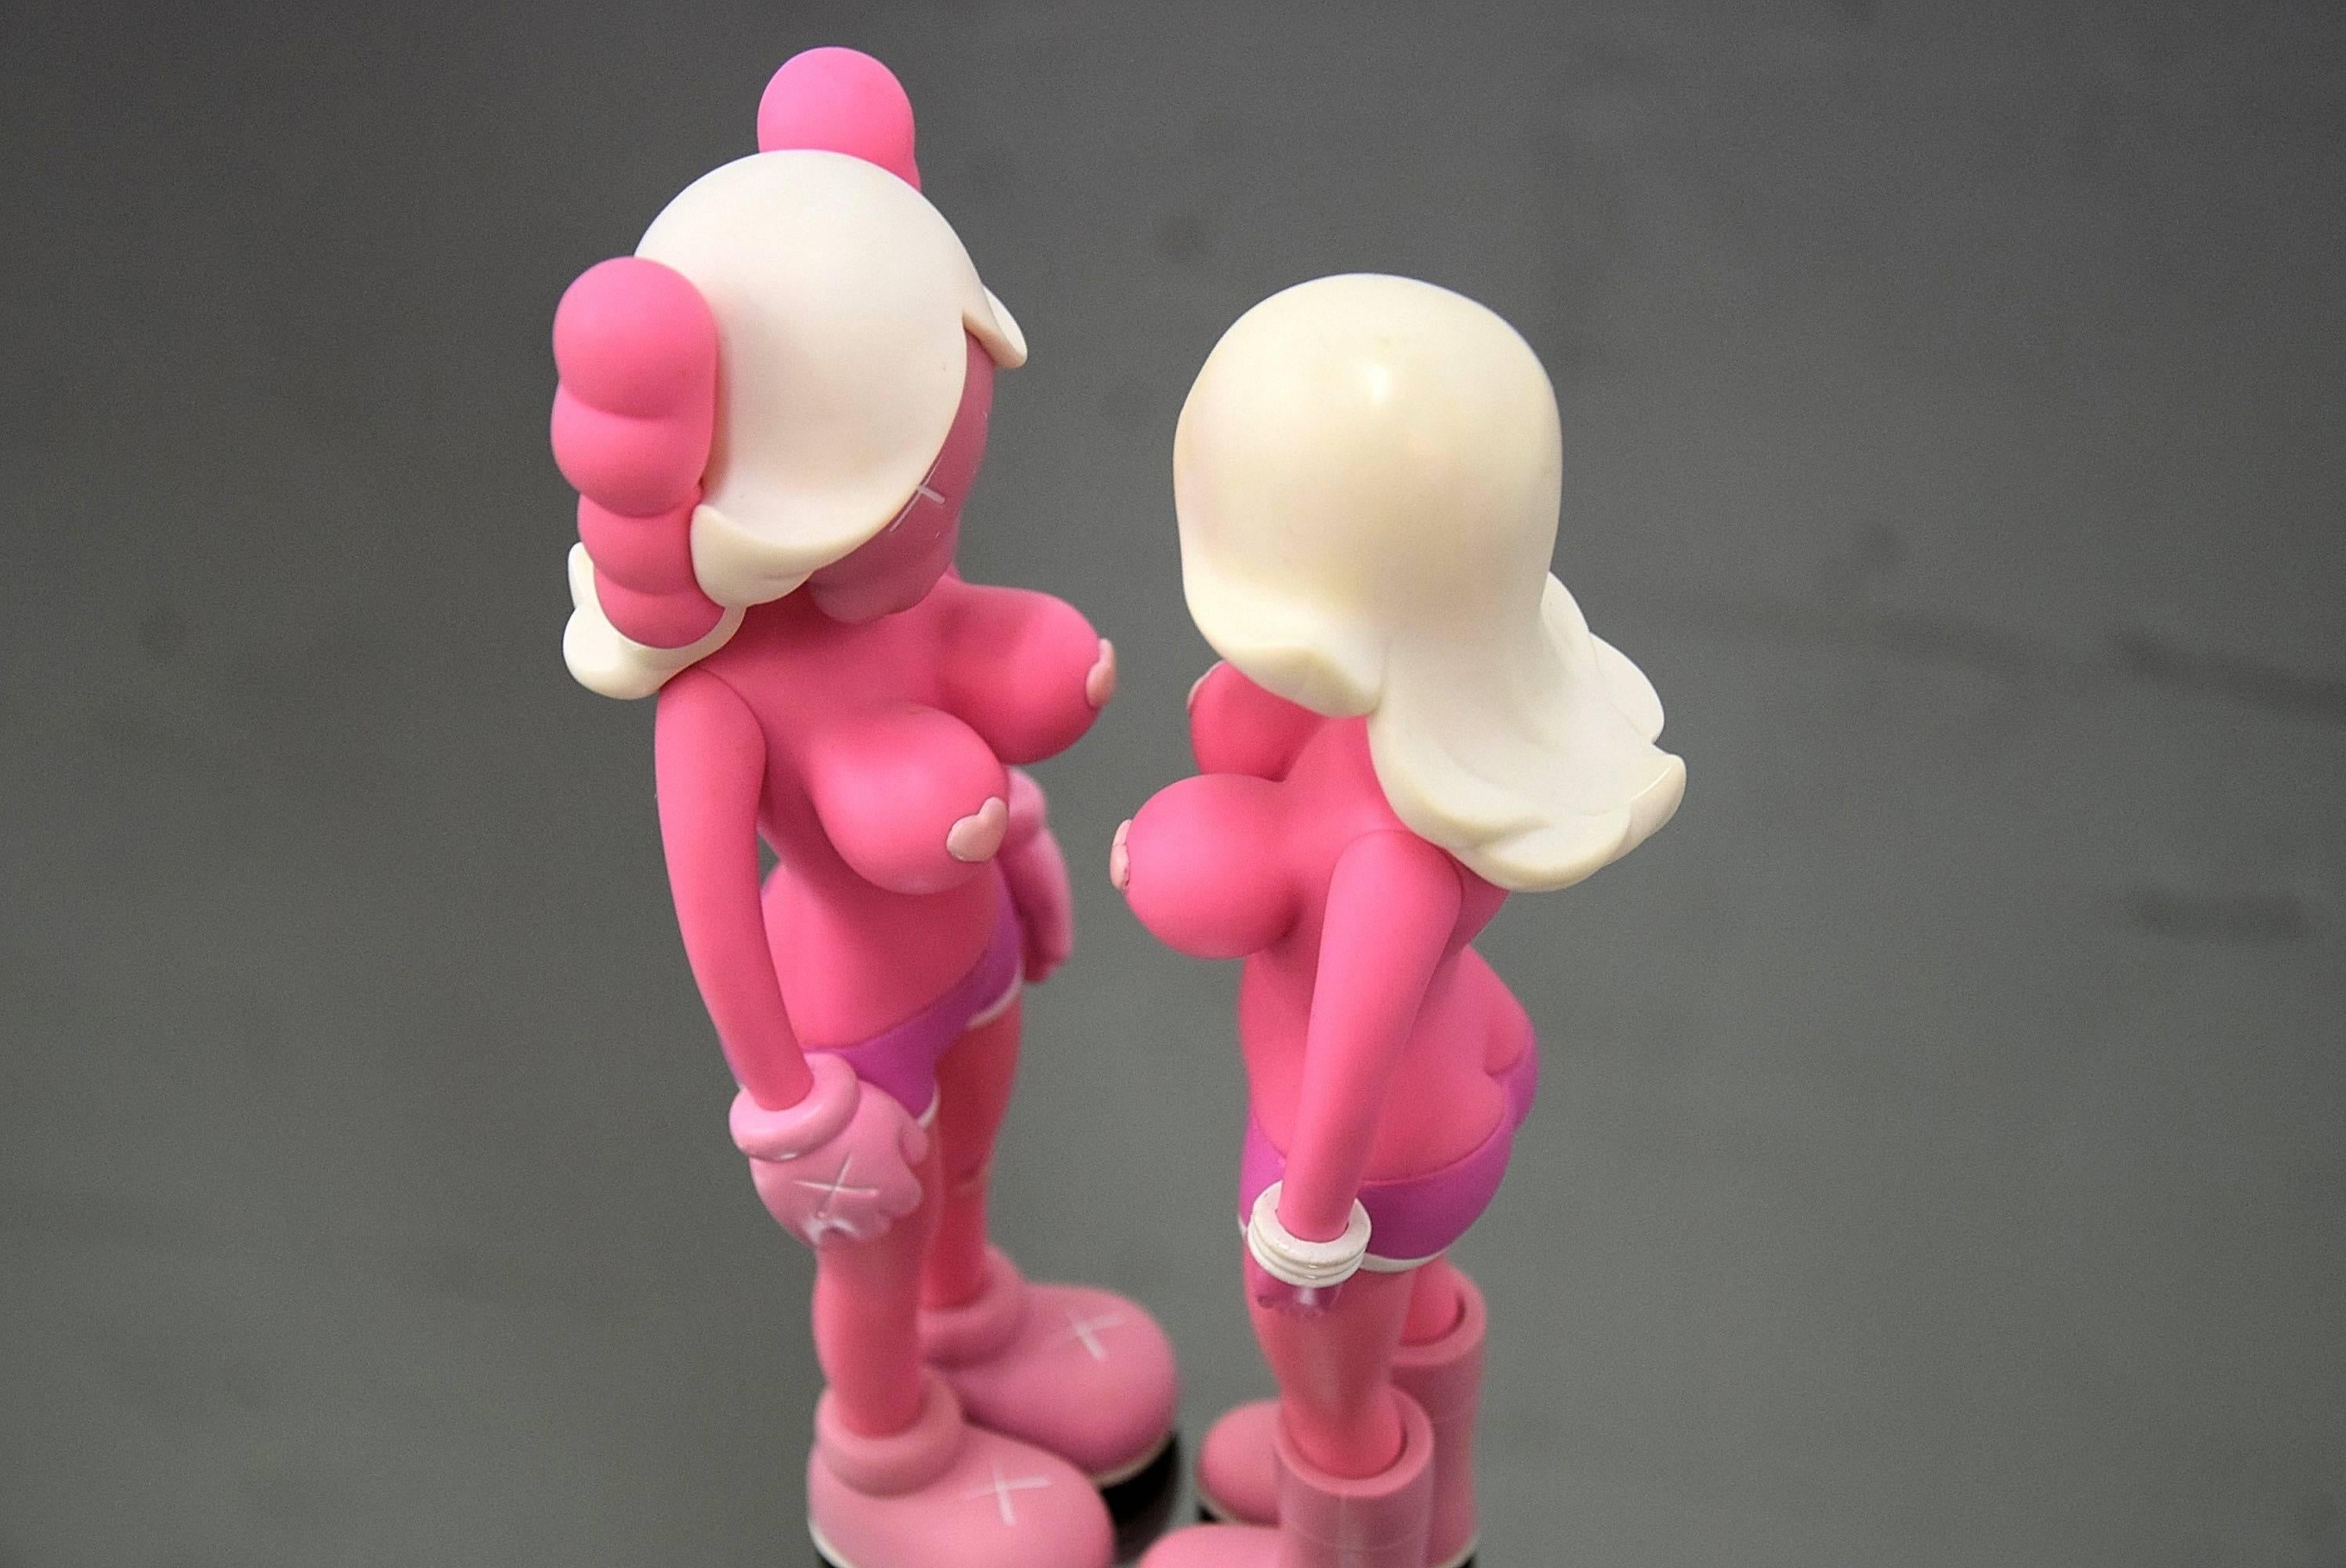 A collaboration between brooklyn-based artist, KAWS and graffiti artist, Todd James (REAS), this set of figures feature the unique styling's of each artist in a neutral, tonal palette. 

Twins have never been exposed and have always been stored